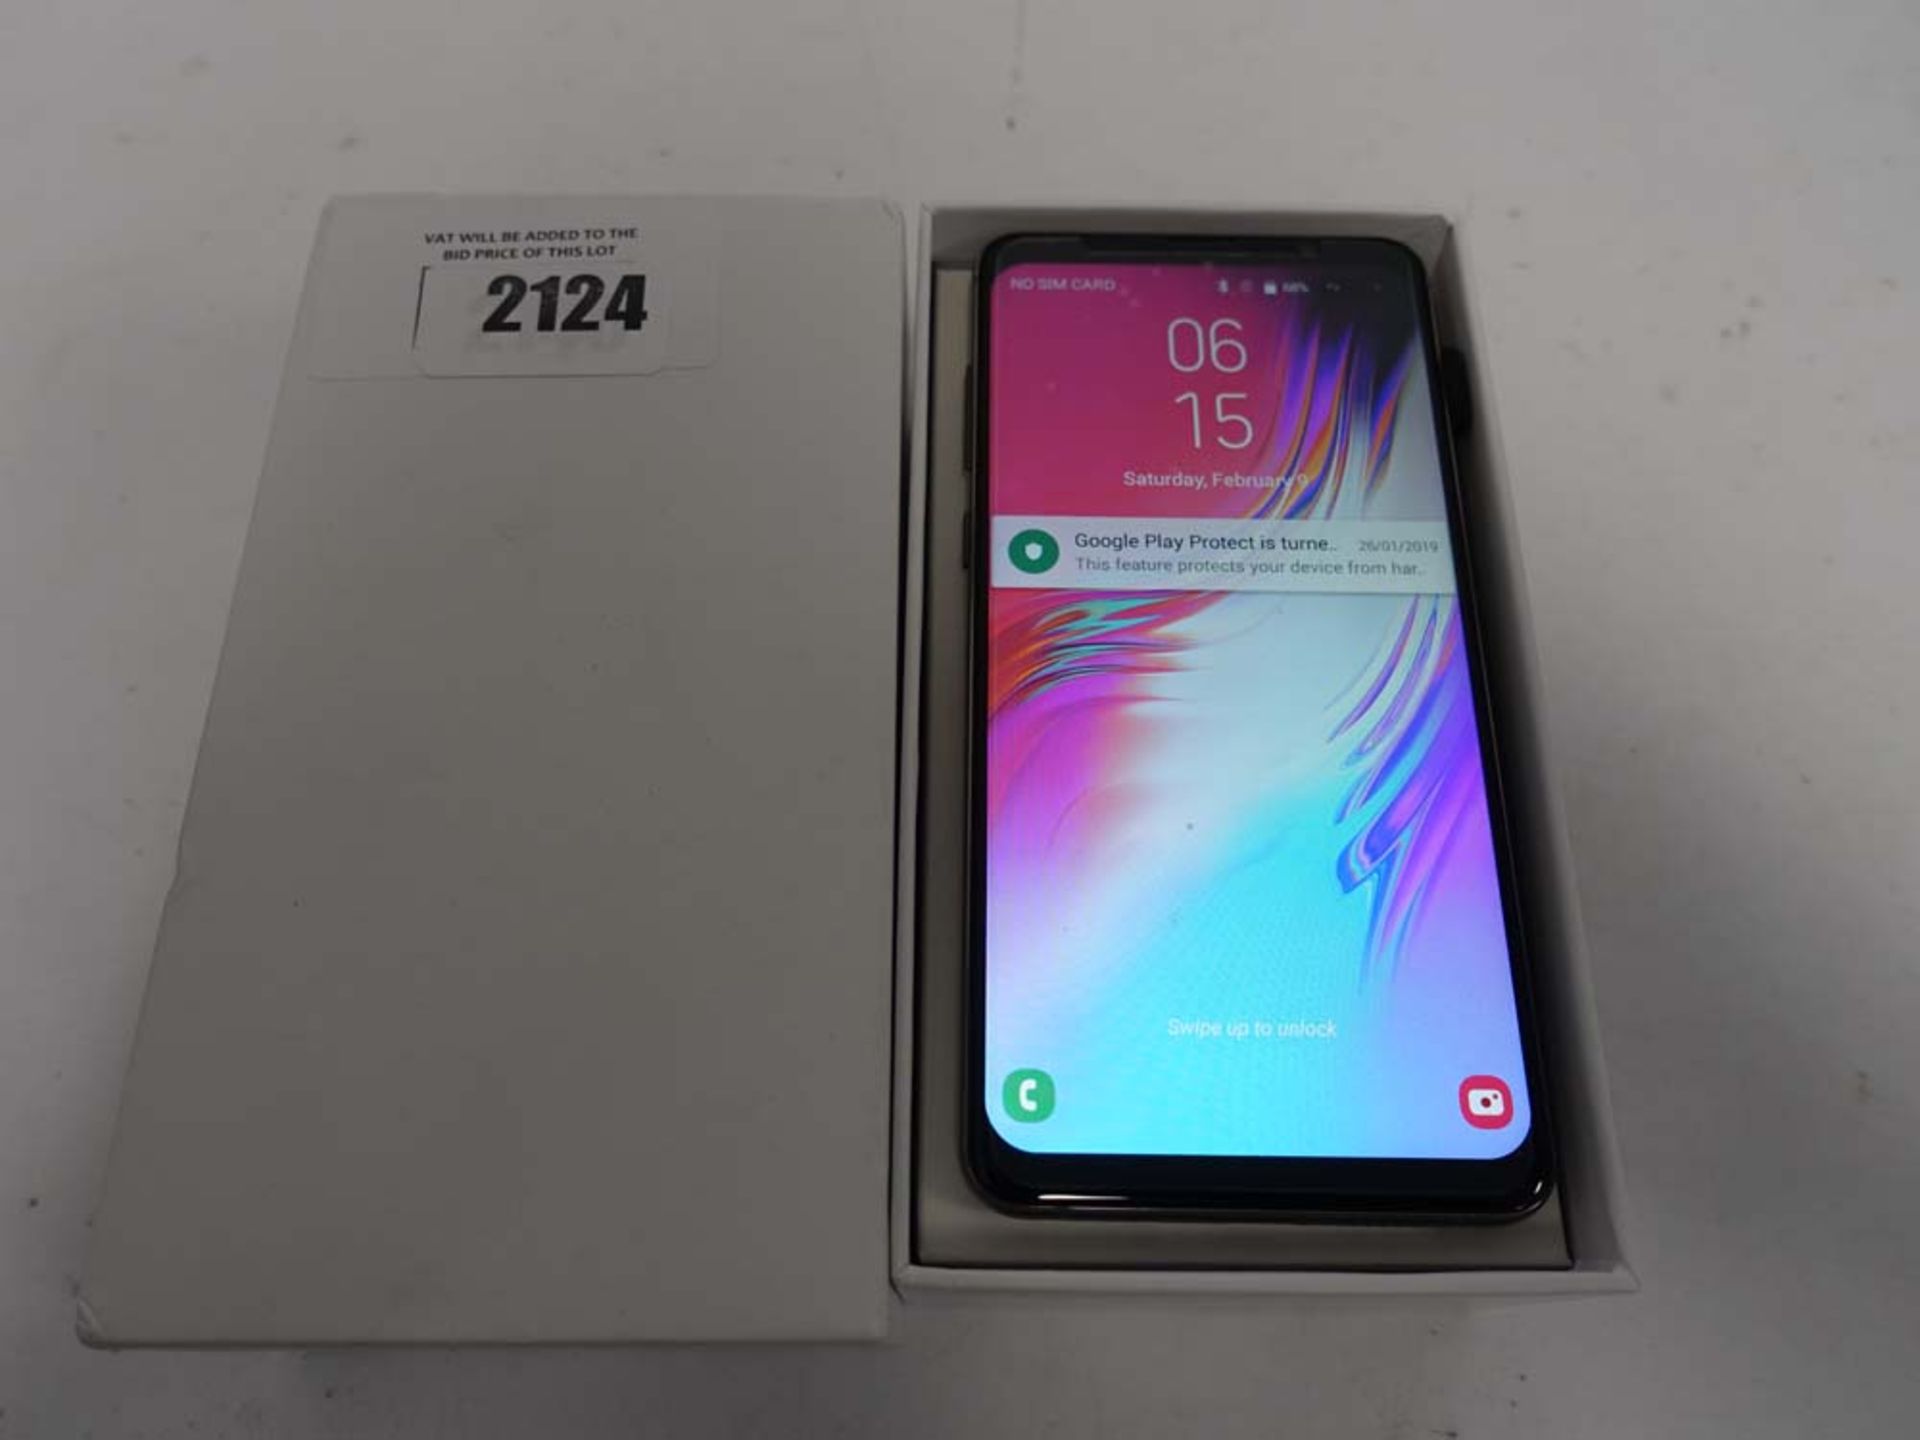 2140 Android 128gb mobile phone with charger and box.